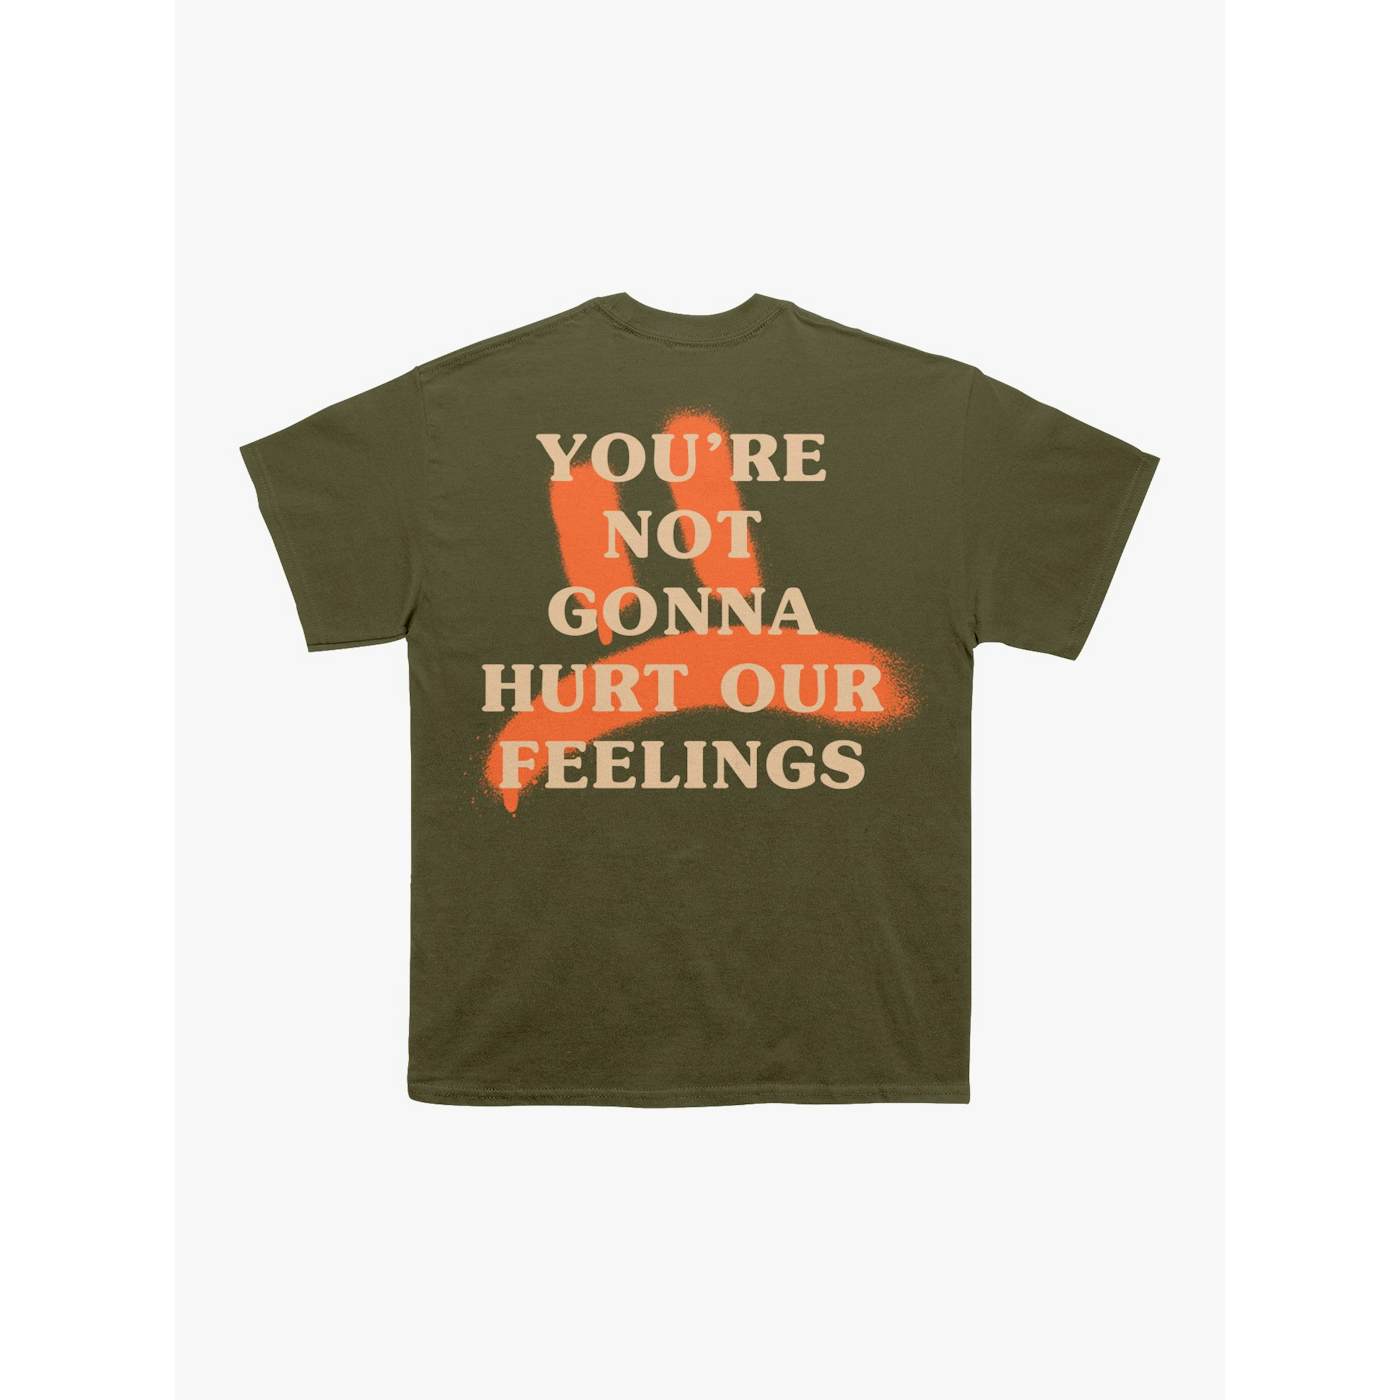 Kevin Hart Hurt Our Feelings Army Green Tee